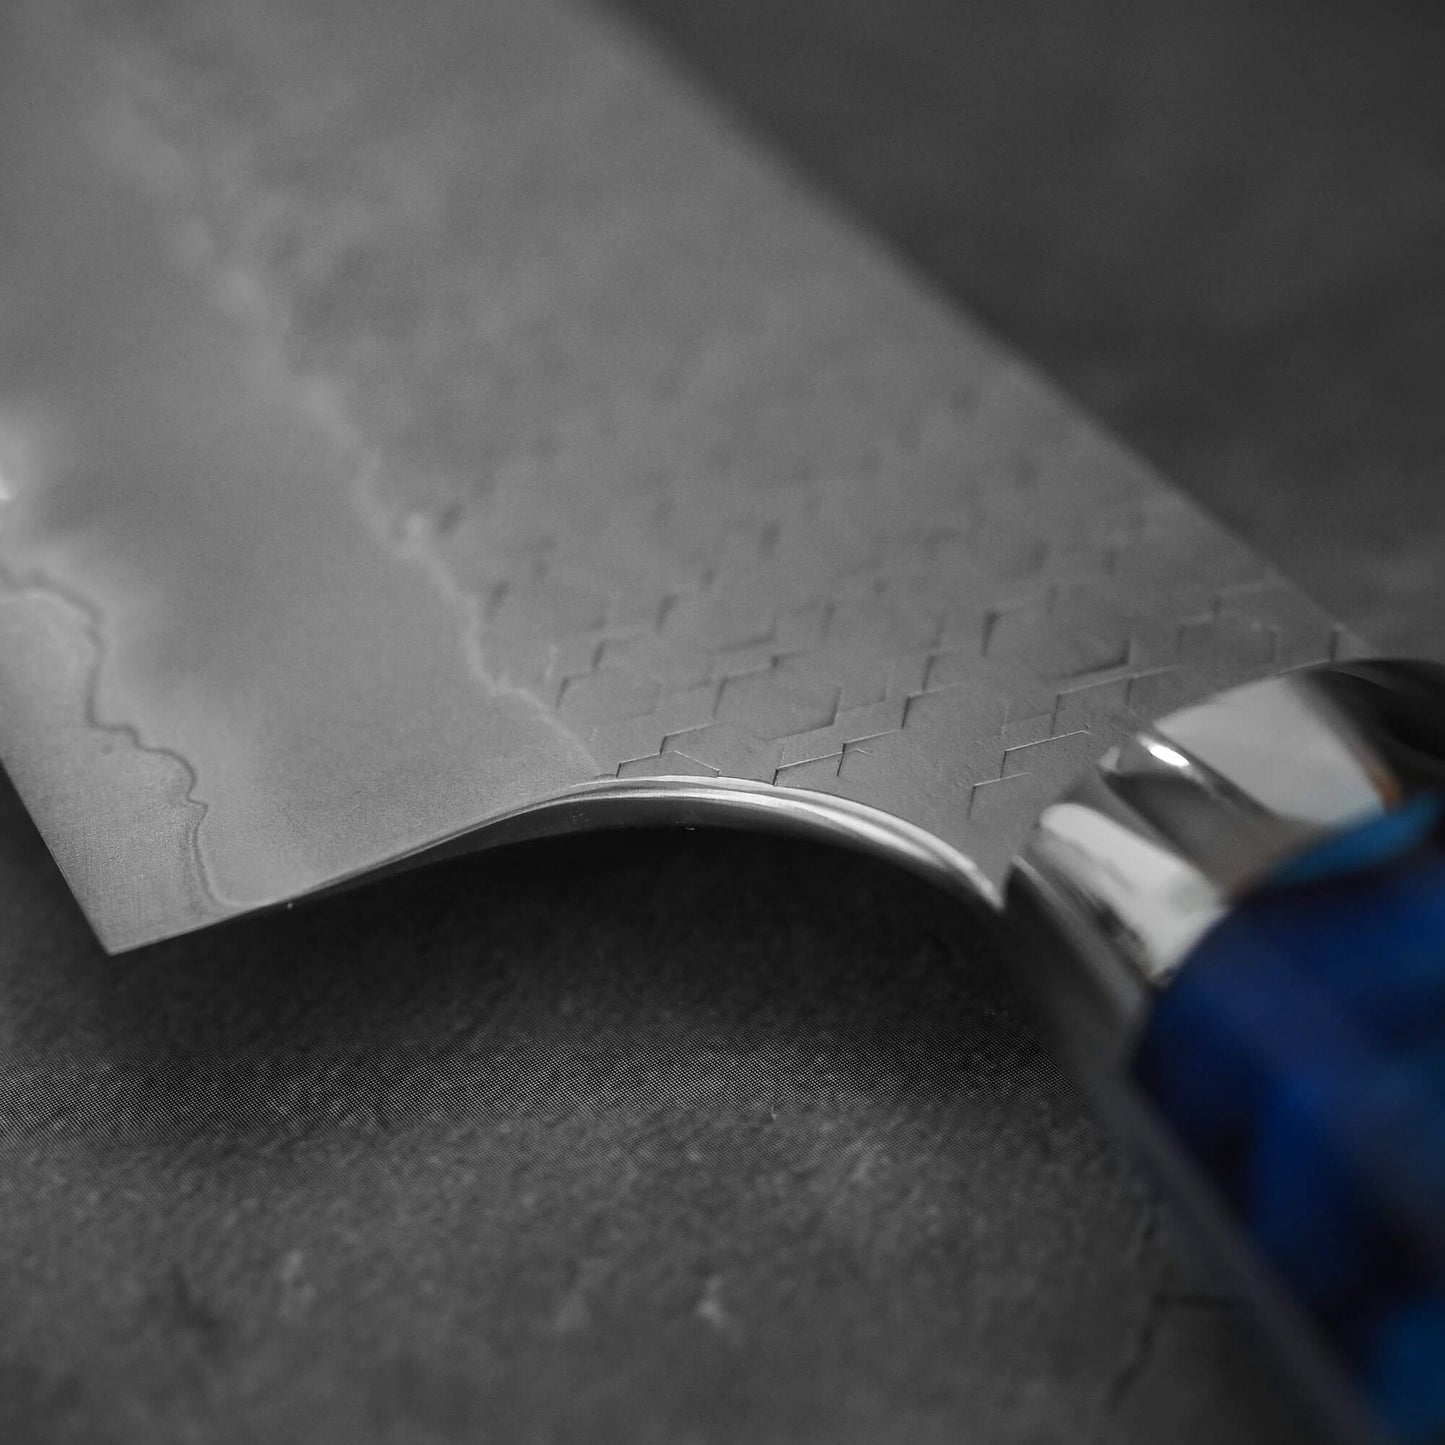 Close up view of 210mm Nigara tsuchime SG2 gyuto knife with blue handle showing the choil